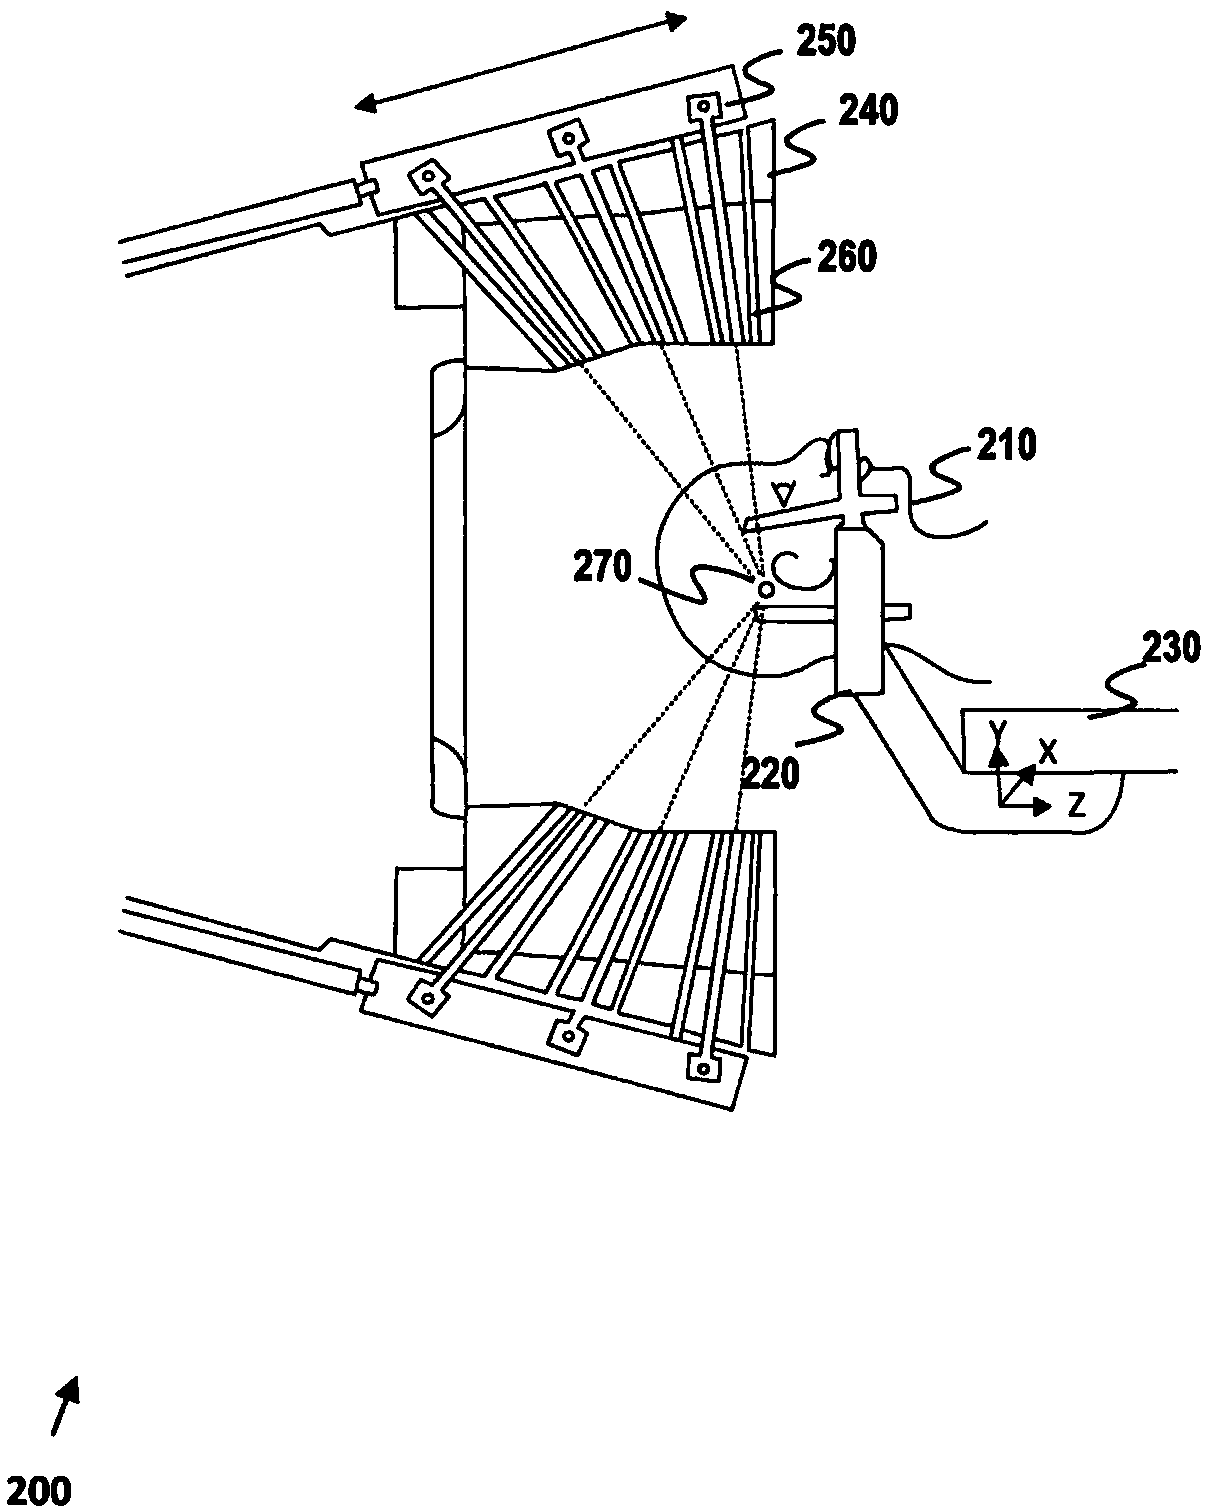 Systems and methods for optimizing treatment planning